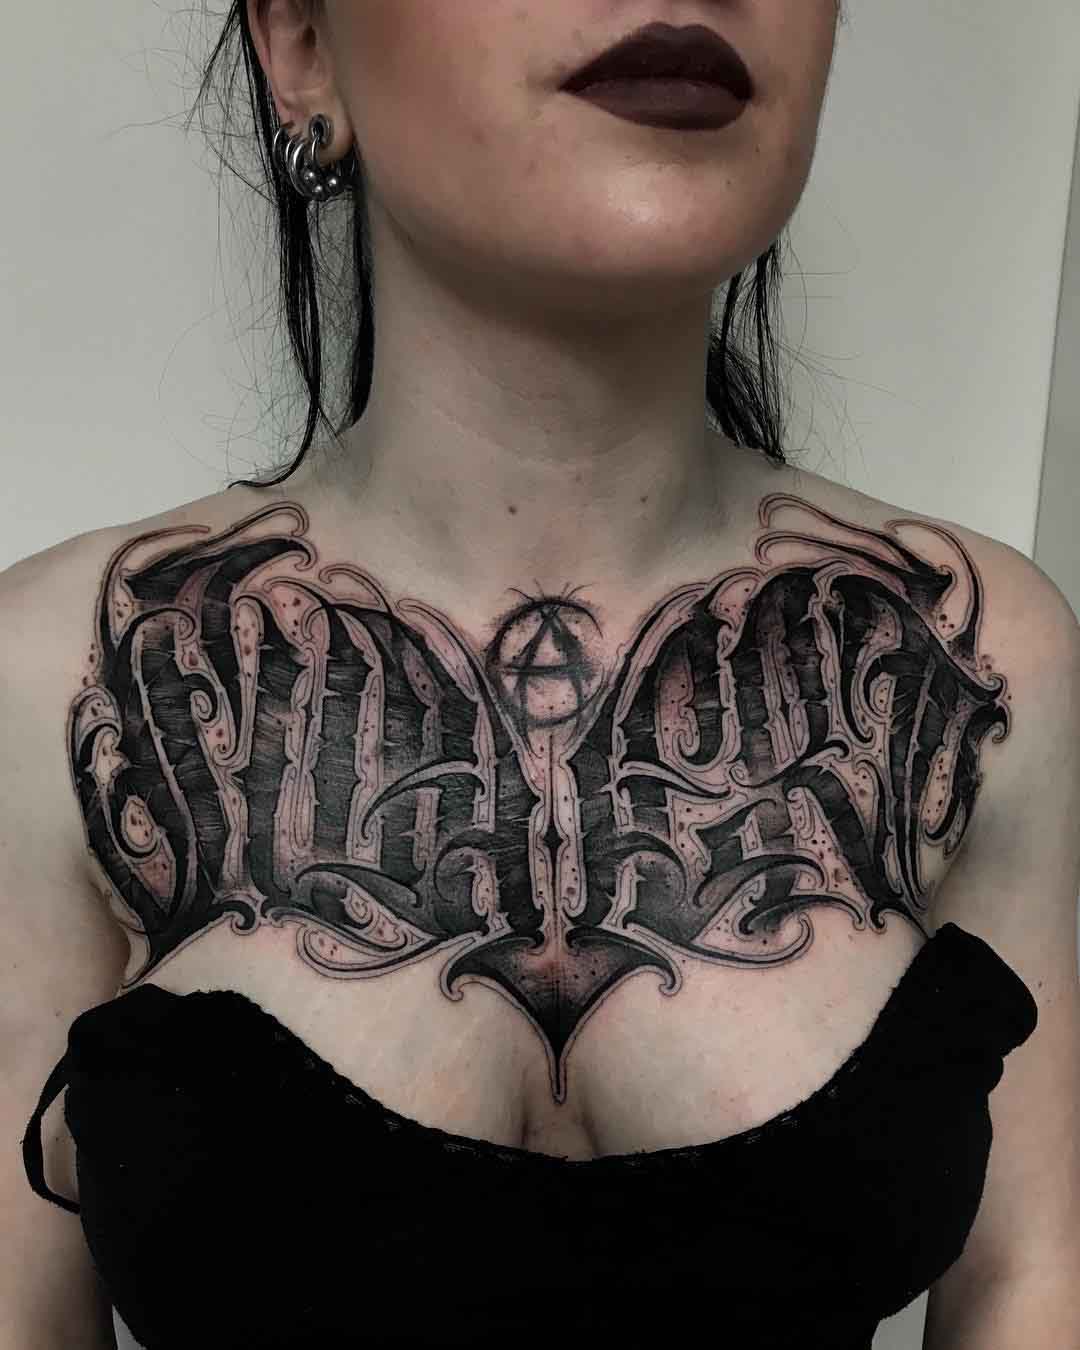 Tattoo tagged with small chest leogavaggio facebook monogram twitter  shoulder letter lettering  inkedappcom